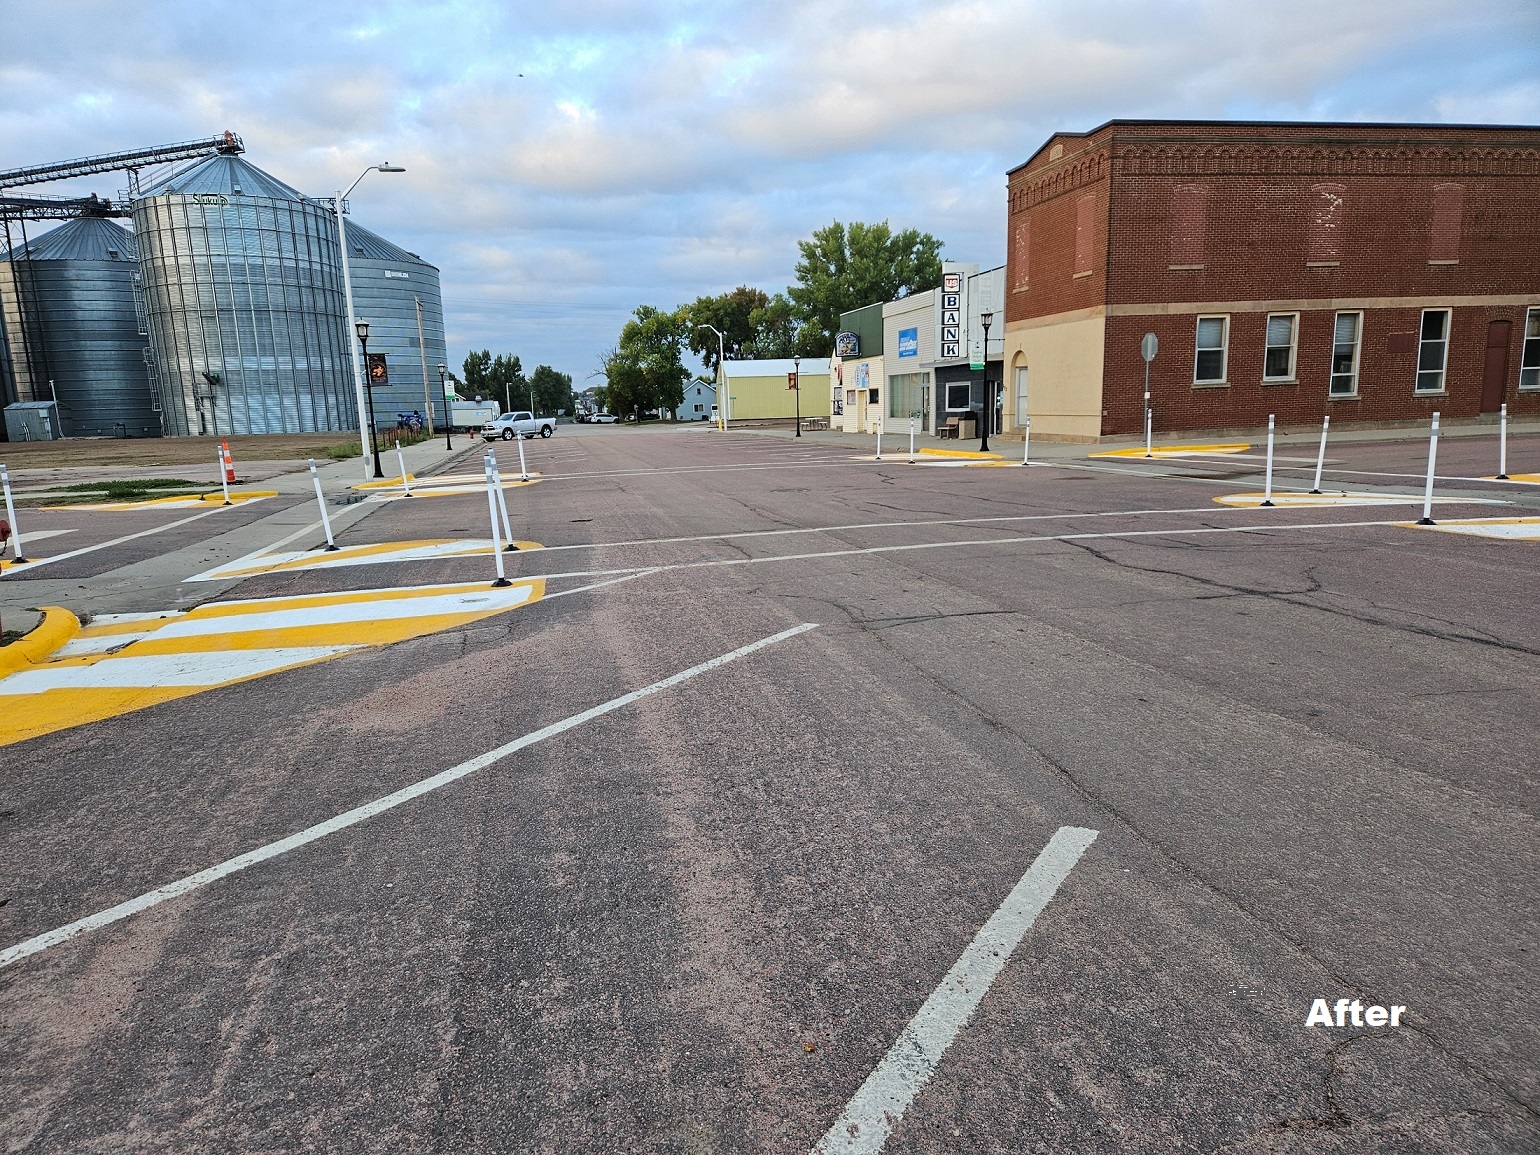 Picture of the Main Street intersection in Hartford, South Dakota, with yellow and white curb extensions and white crosswalks painted on the streets.